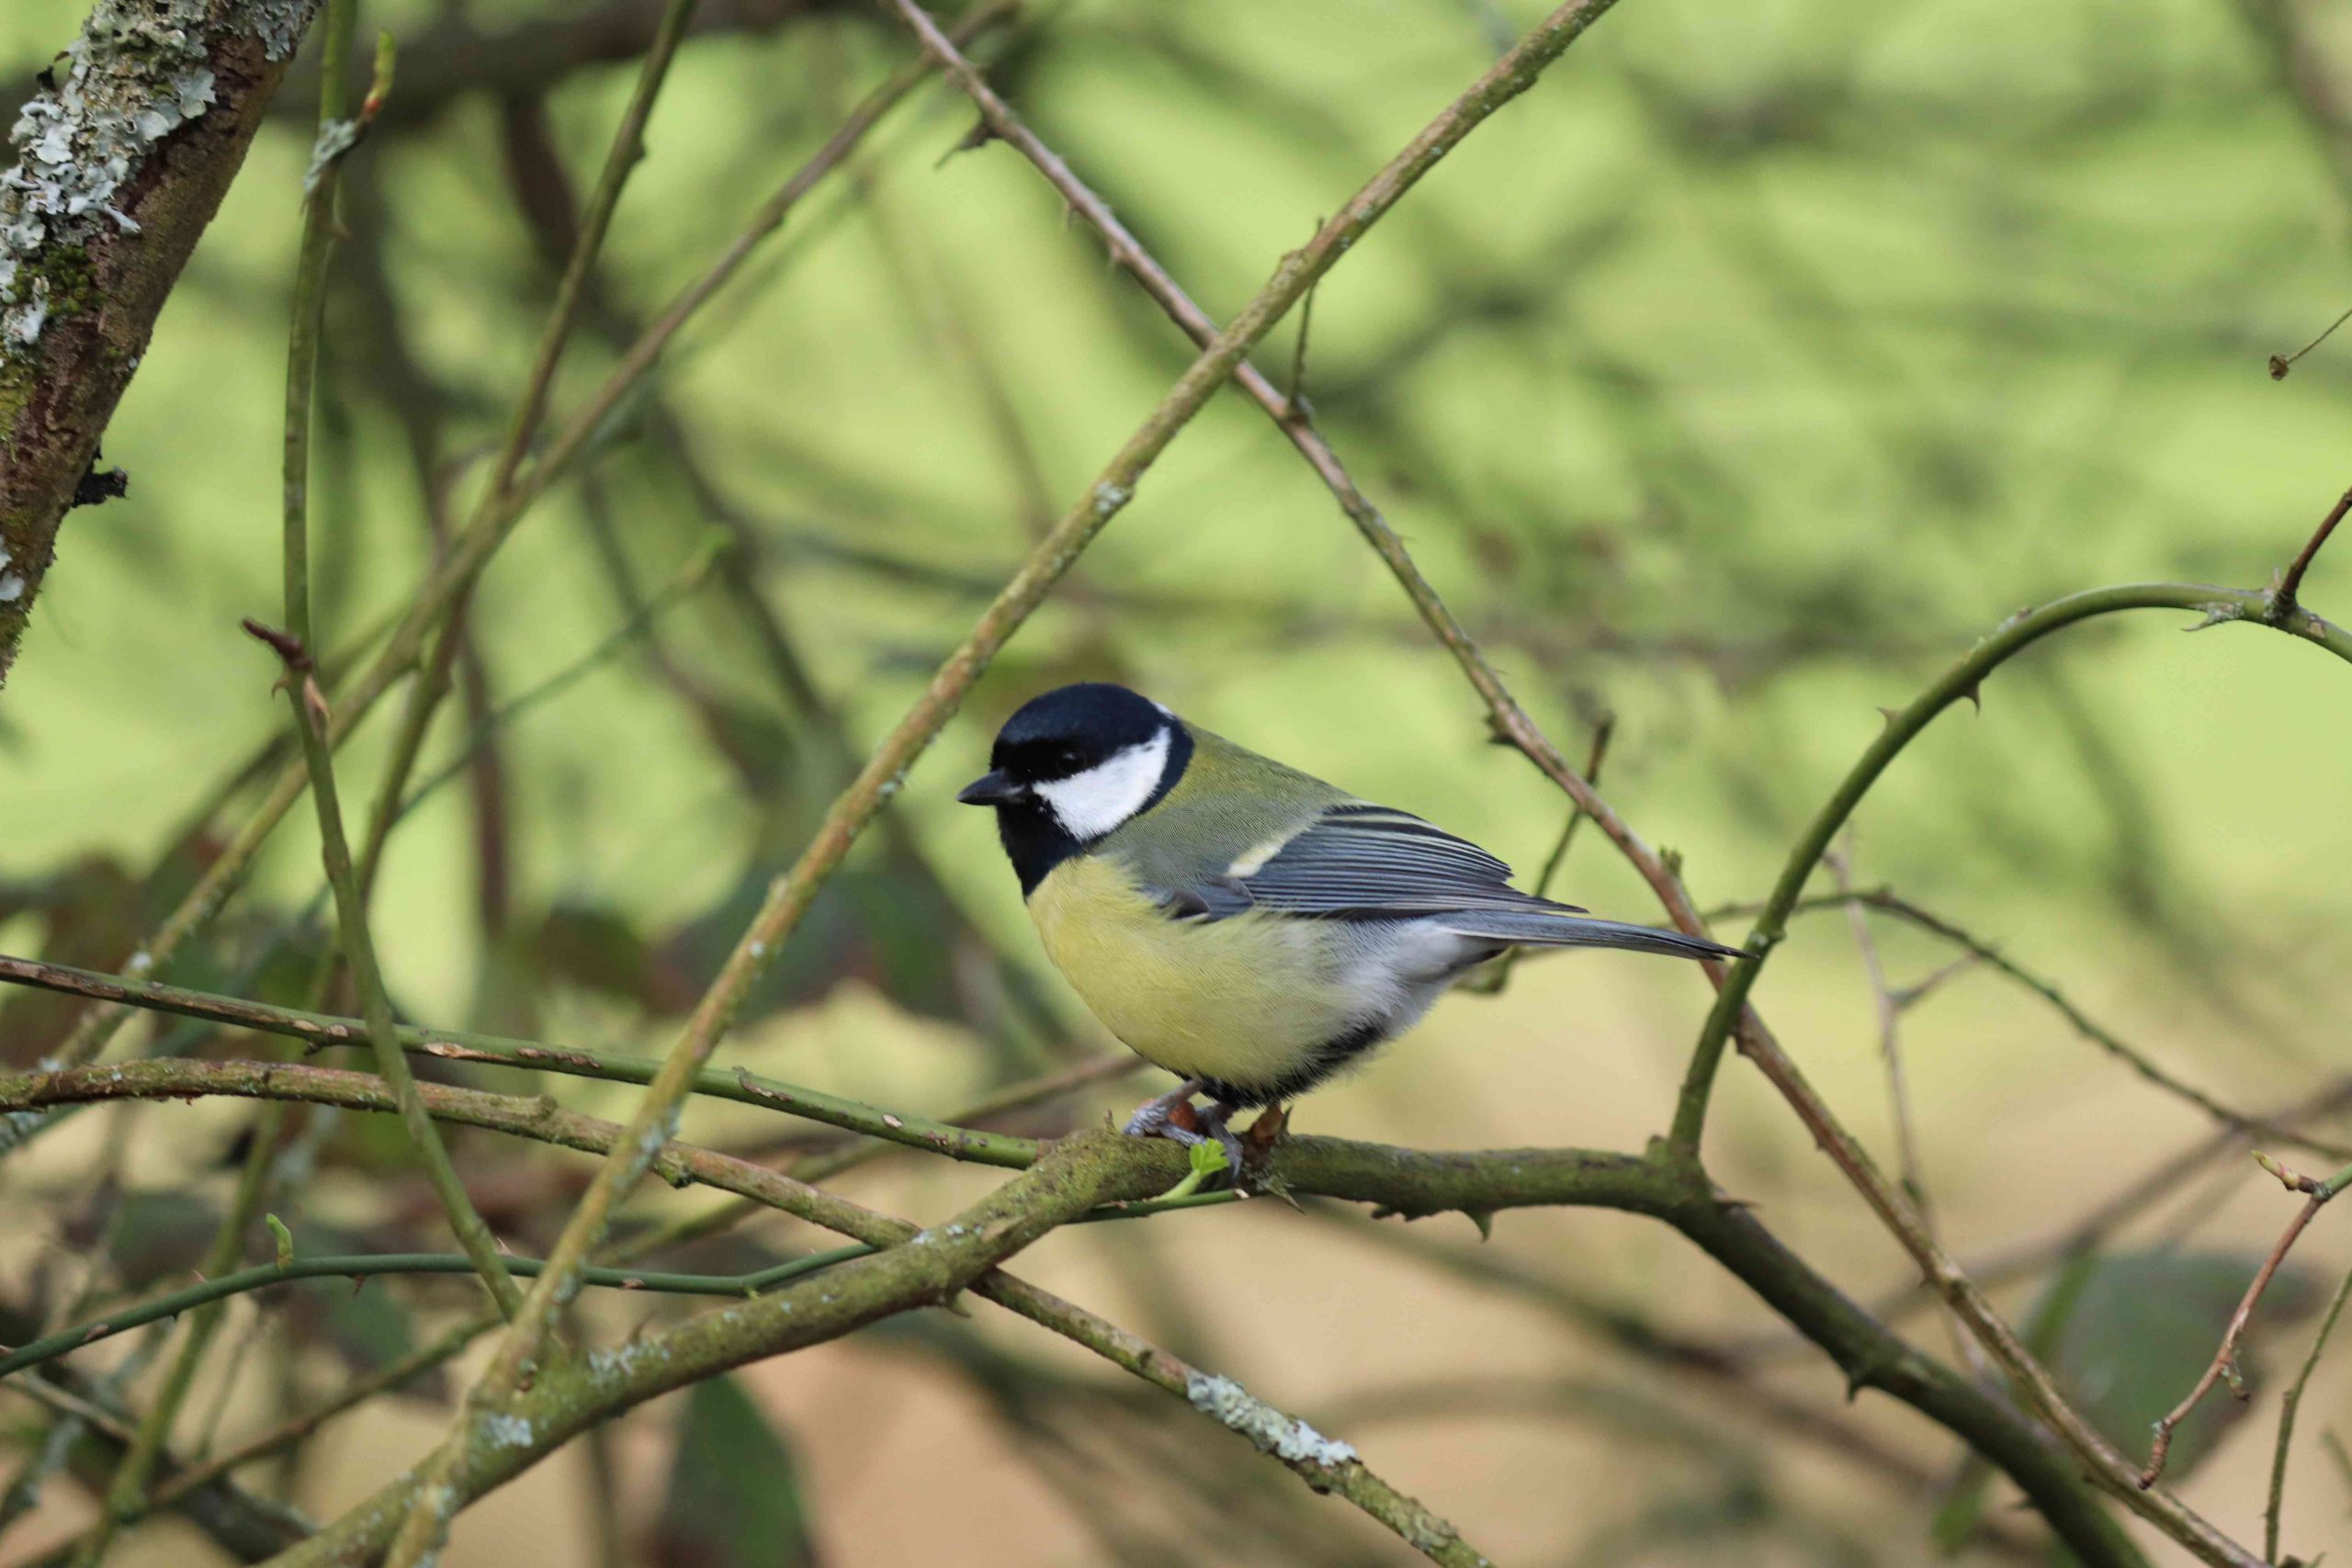 Great tit on a branch